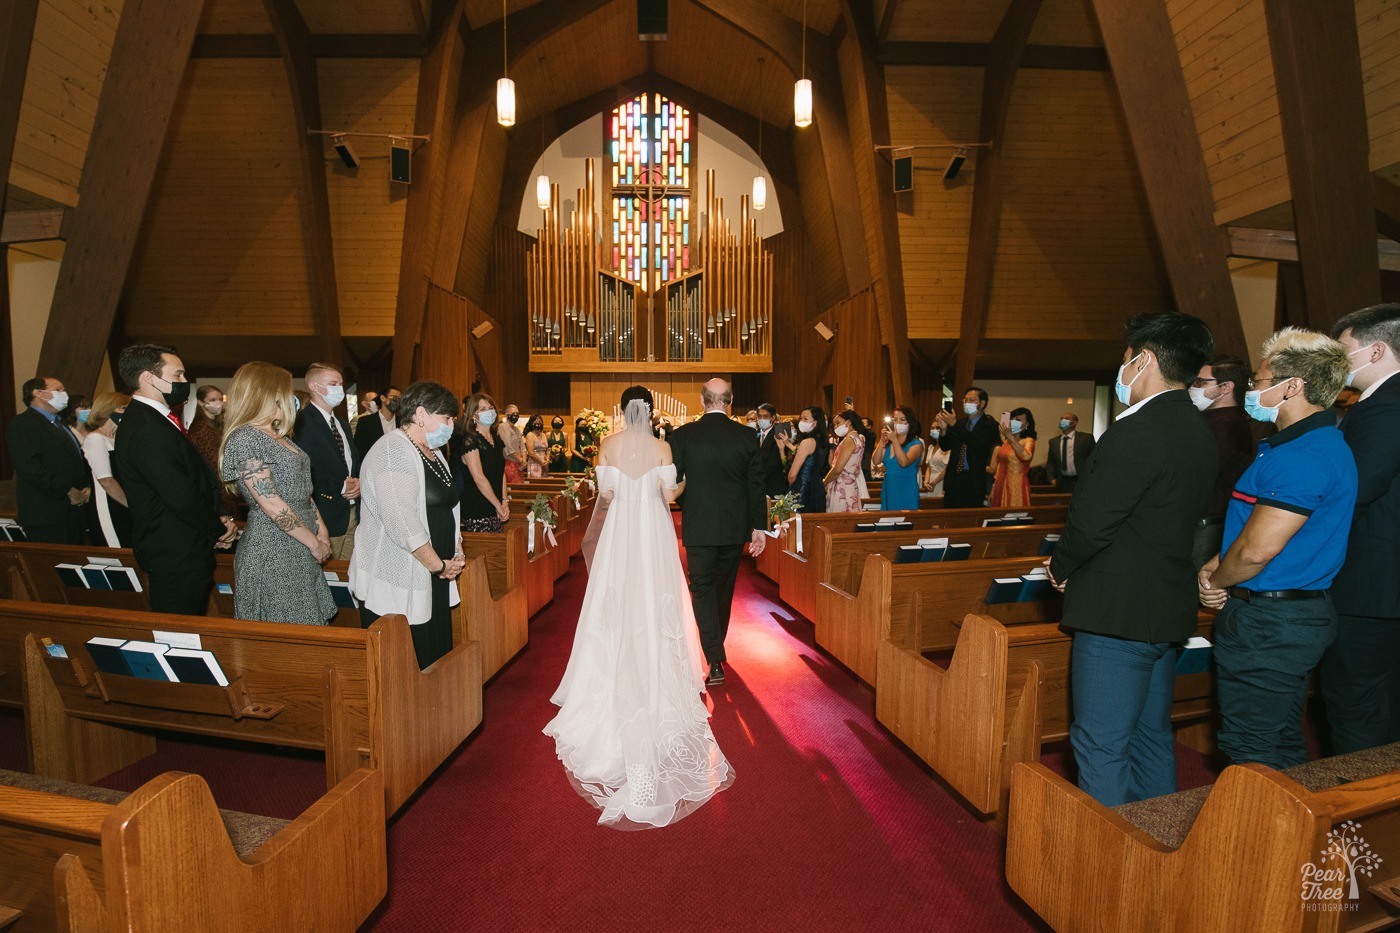 Looking into Eastminster Presbyterian Church sanctuary as father walks his bride daughter down the aisle